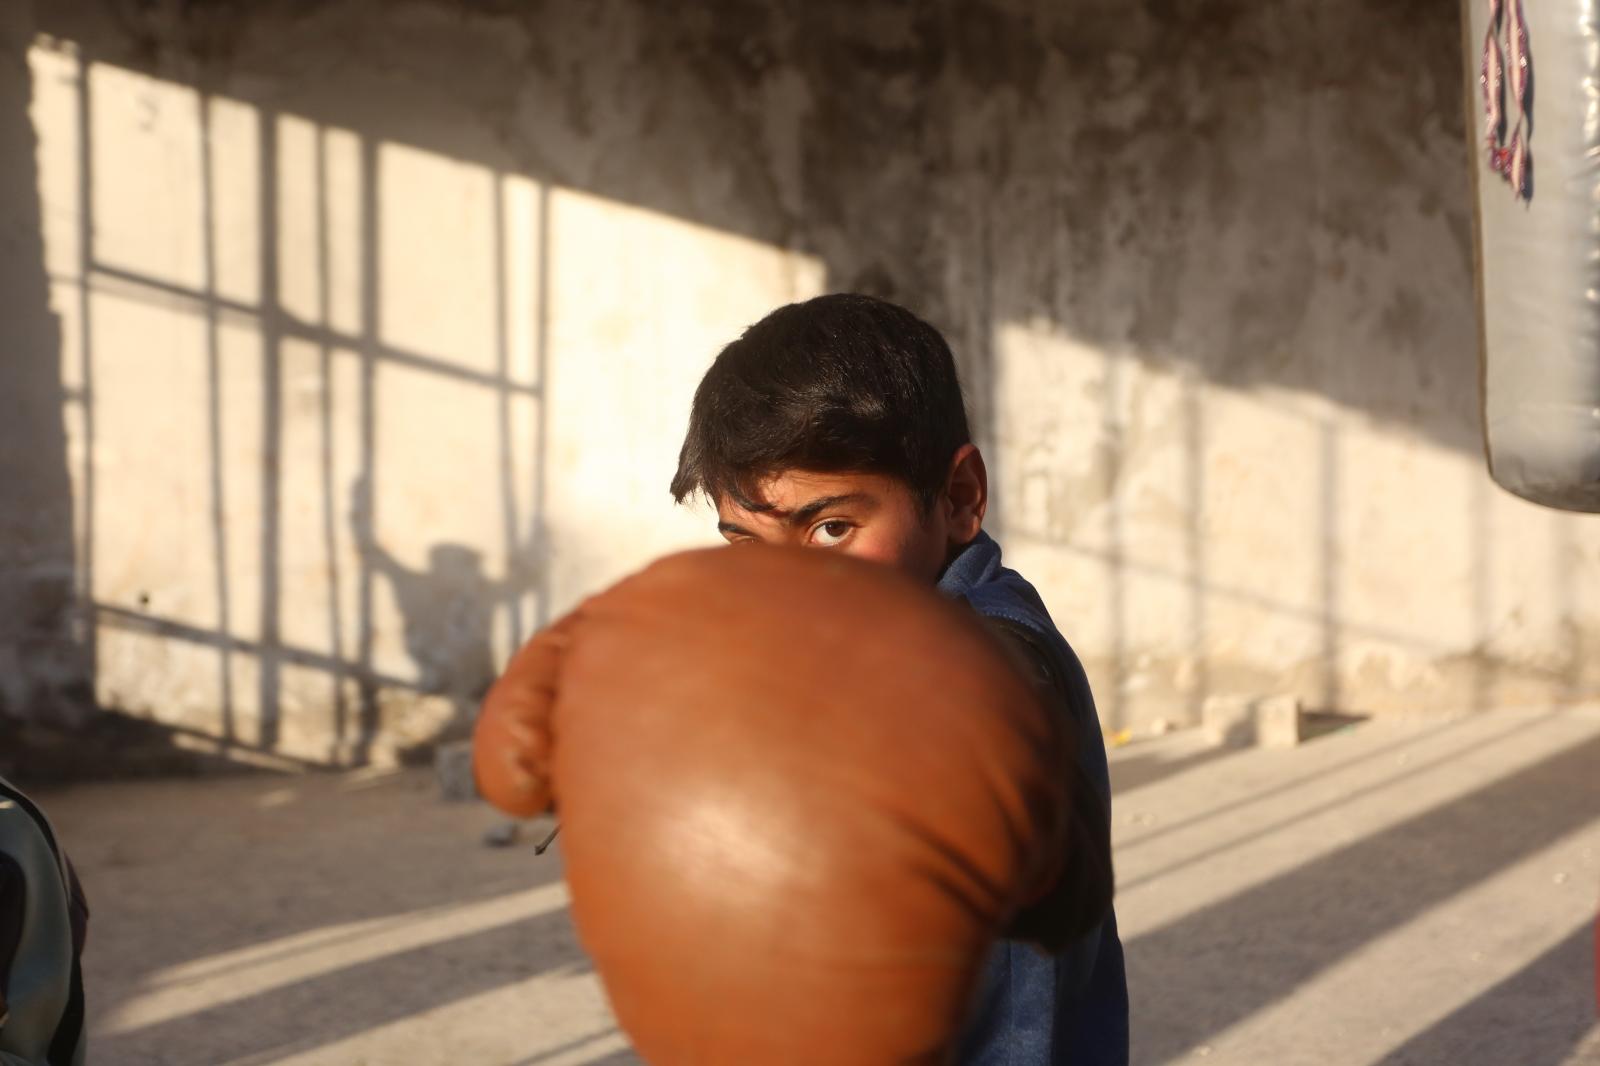  Boxing workout in the Syrian town of Atareb.